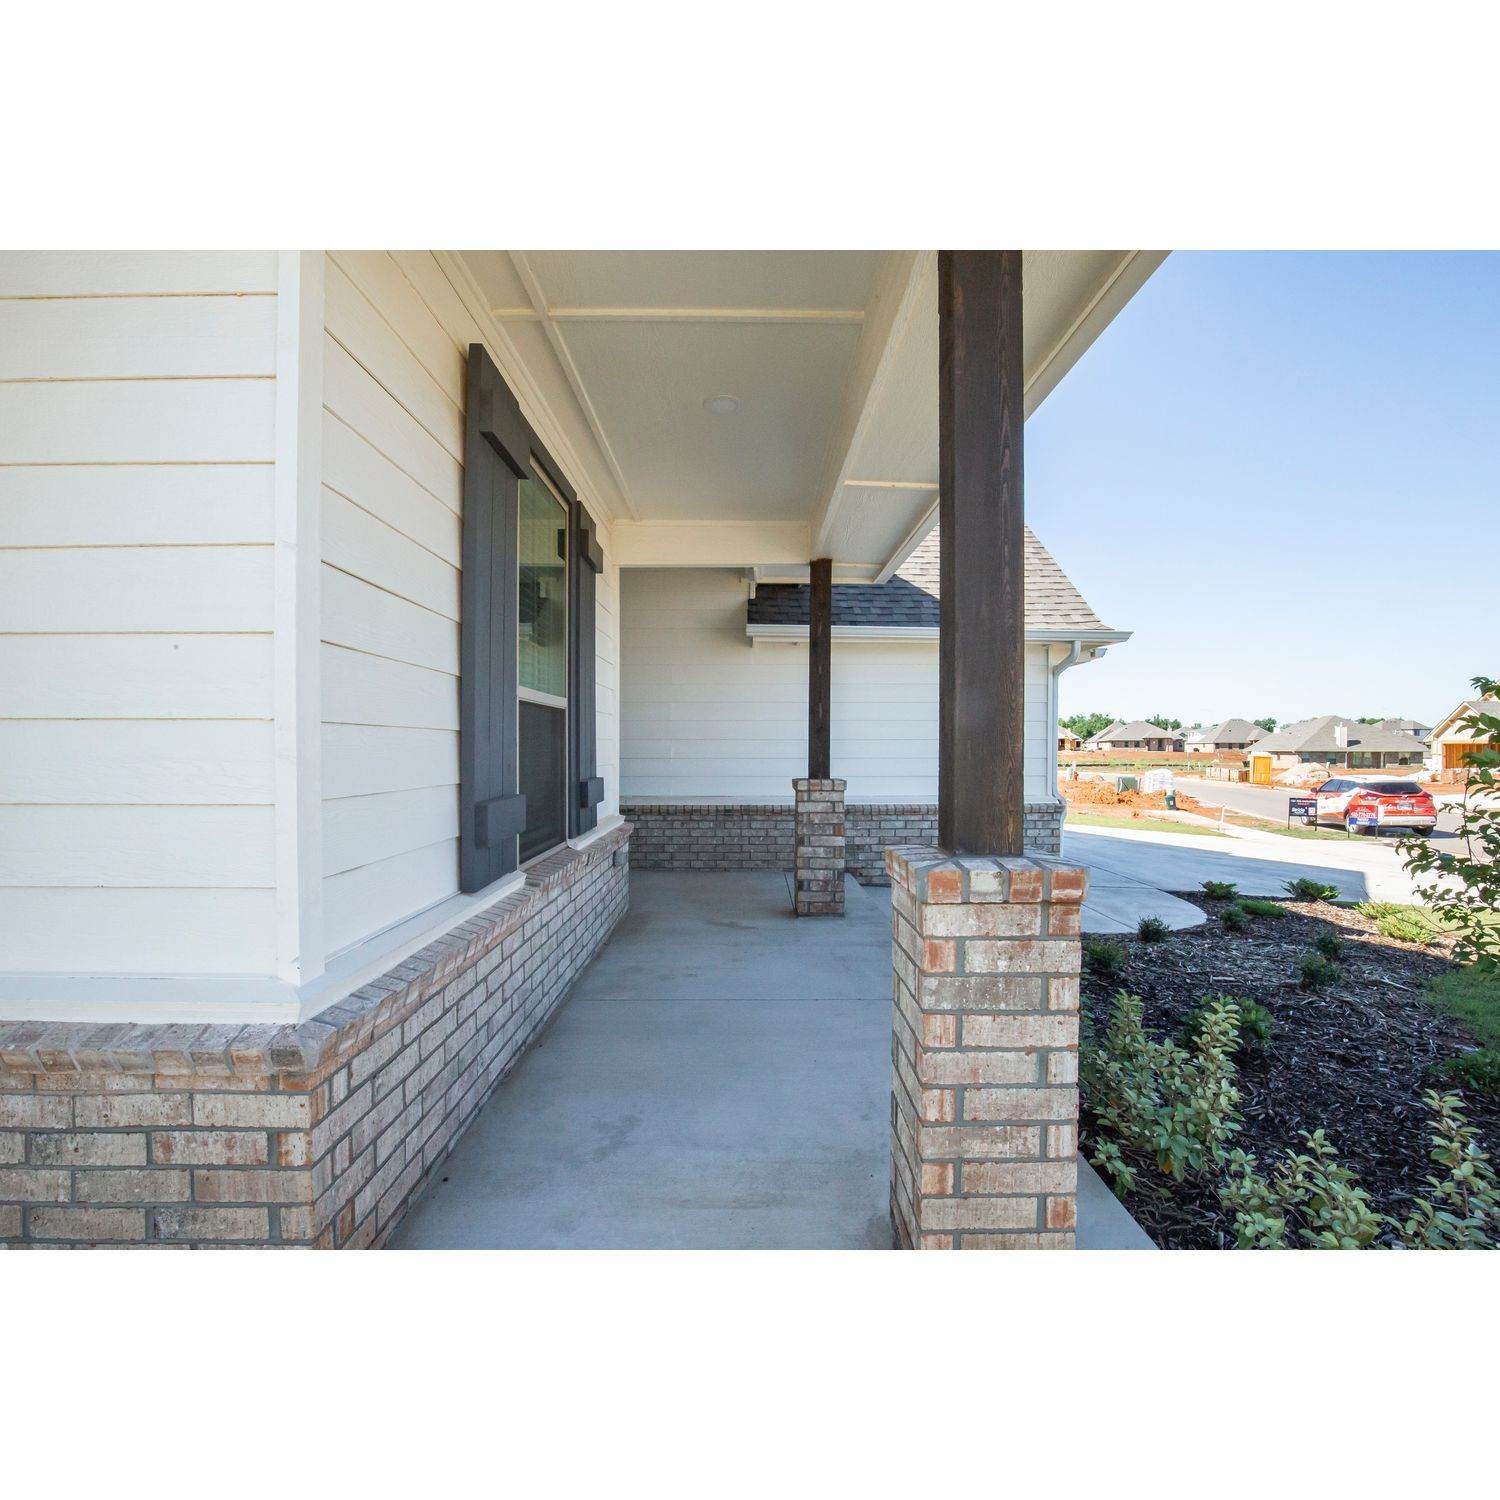 6. Broadmoore Heights building at 2800 Heather Haven, Moore, OK 73160